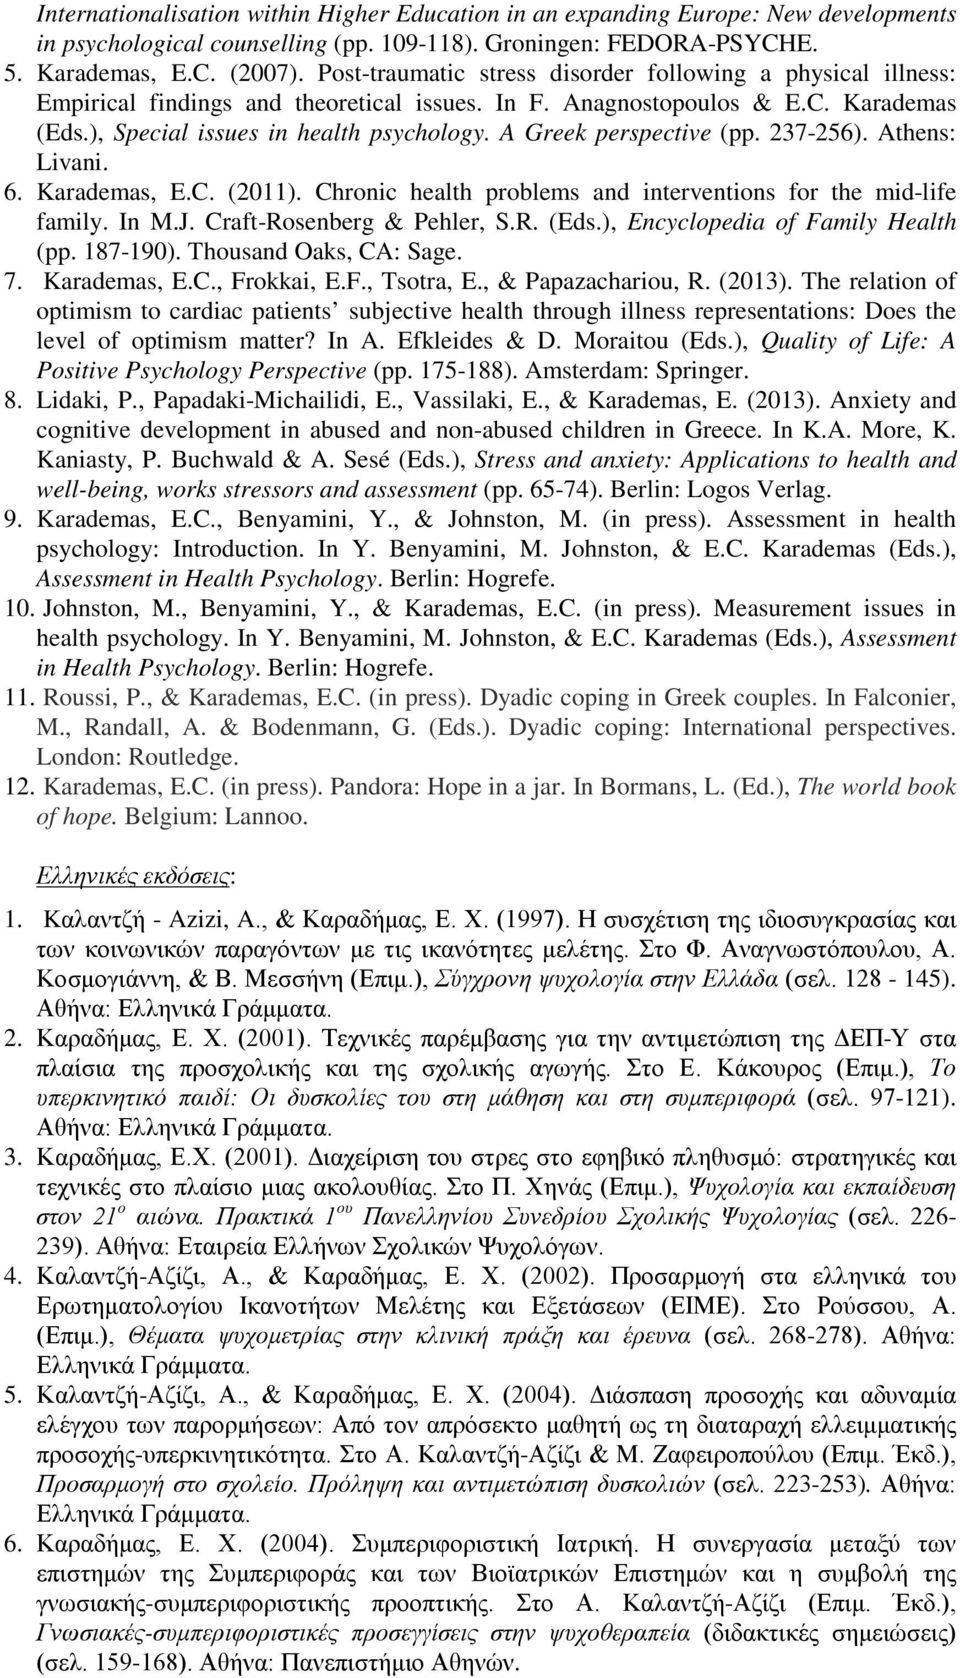 A Greek perspective (pp. 237-256). Athens: Livani. 6. Karademas, E.C. (2011). Chronic health problems and interventions for the mid-life family. In M.J. Craft-Rosenberg & Pehler, S.R. (Eds.